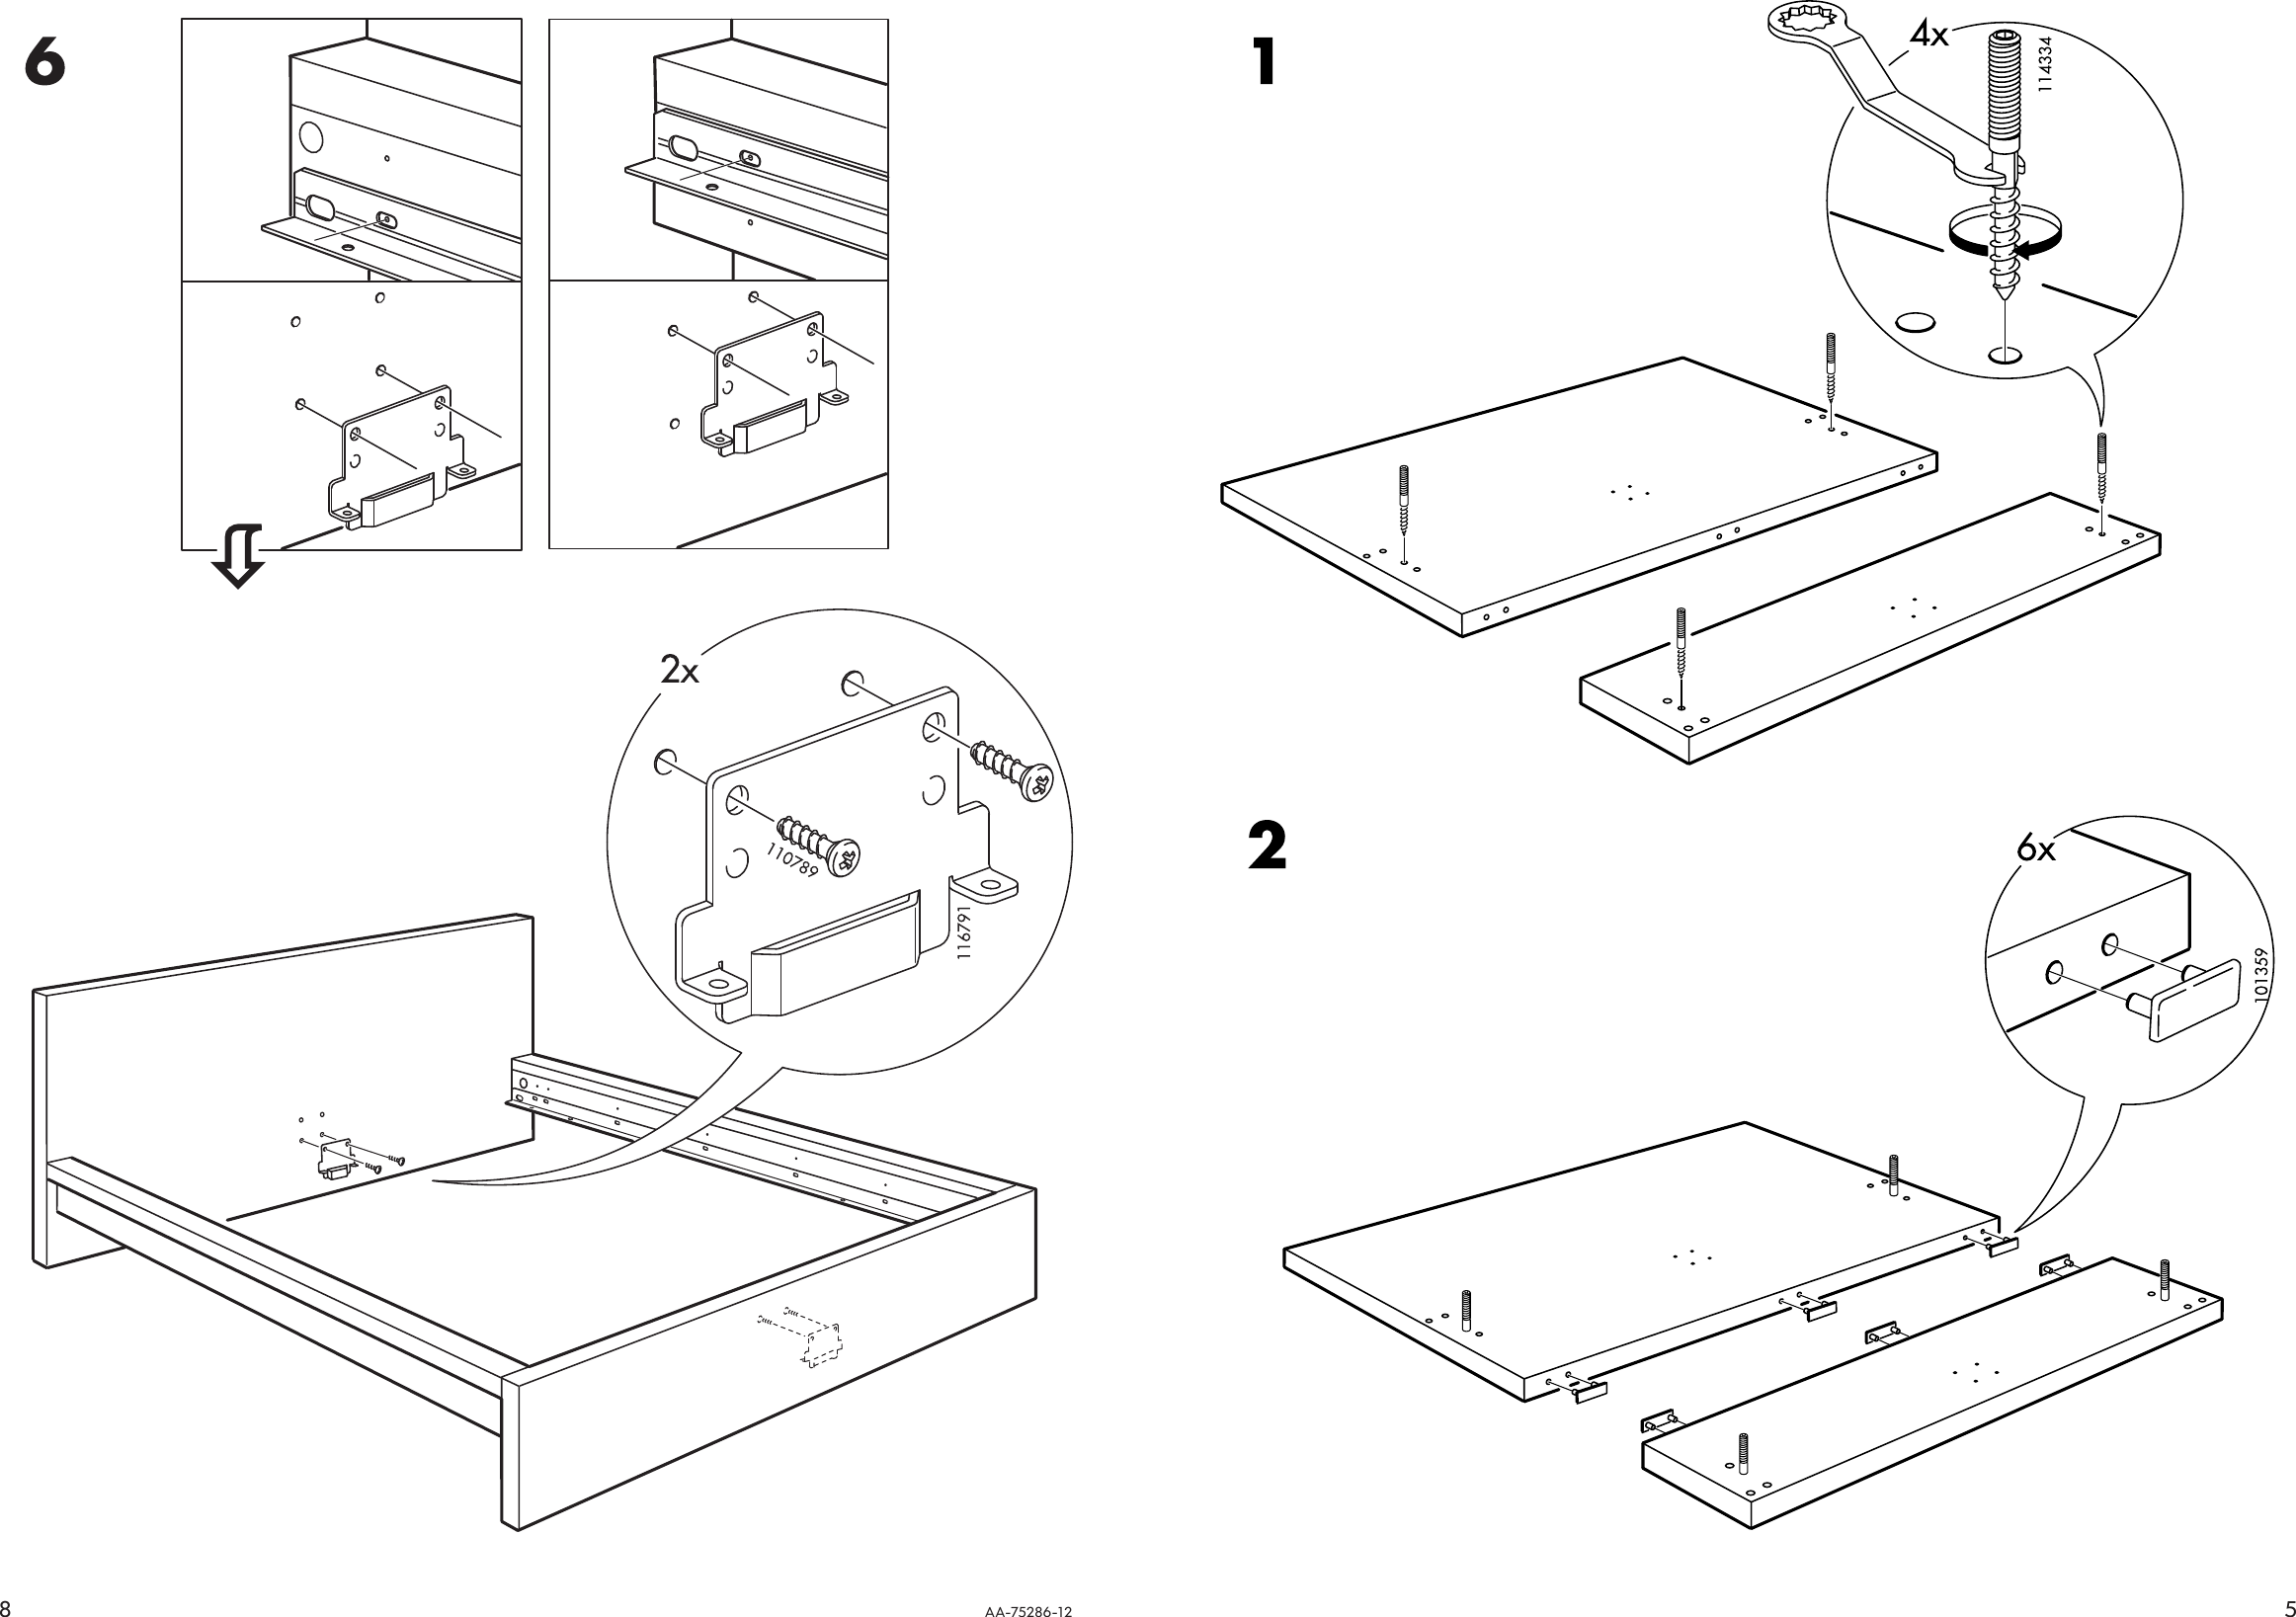 Ikea Malm Bed Frame Queen Assembly, Ikea Malm High Bed Frame Instructions